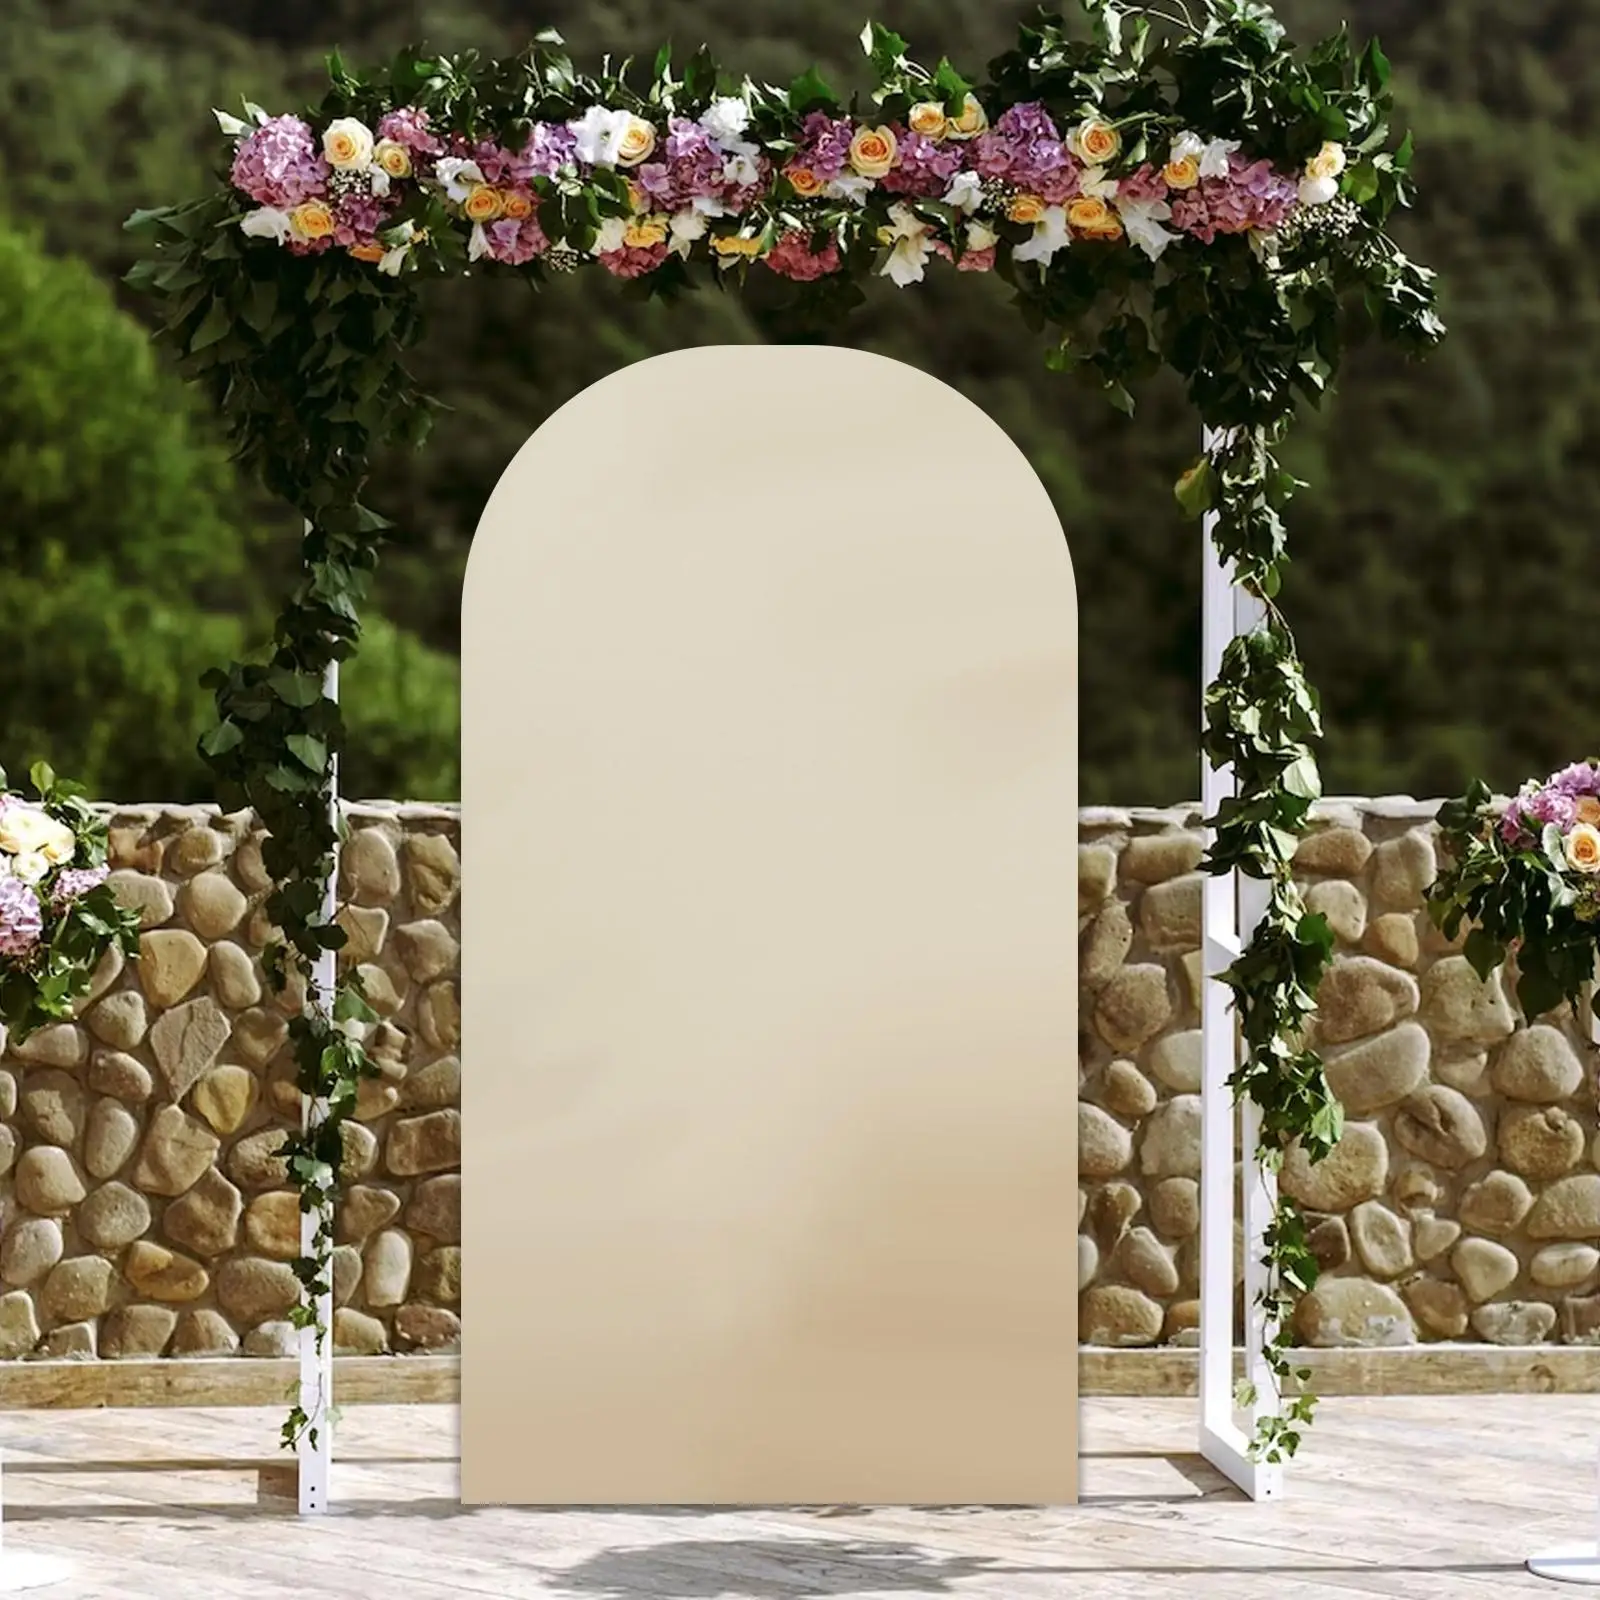 Arch Backdrop Cover Arch Frame Cover for Parties Photo Props Ceremony